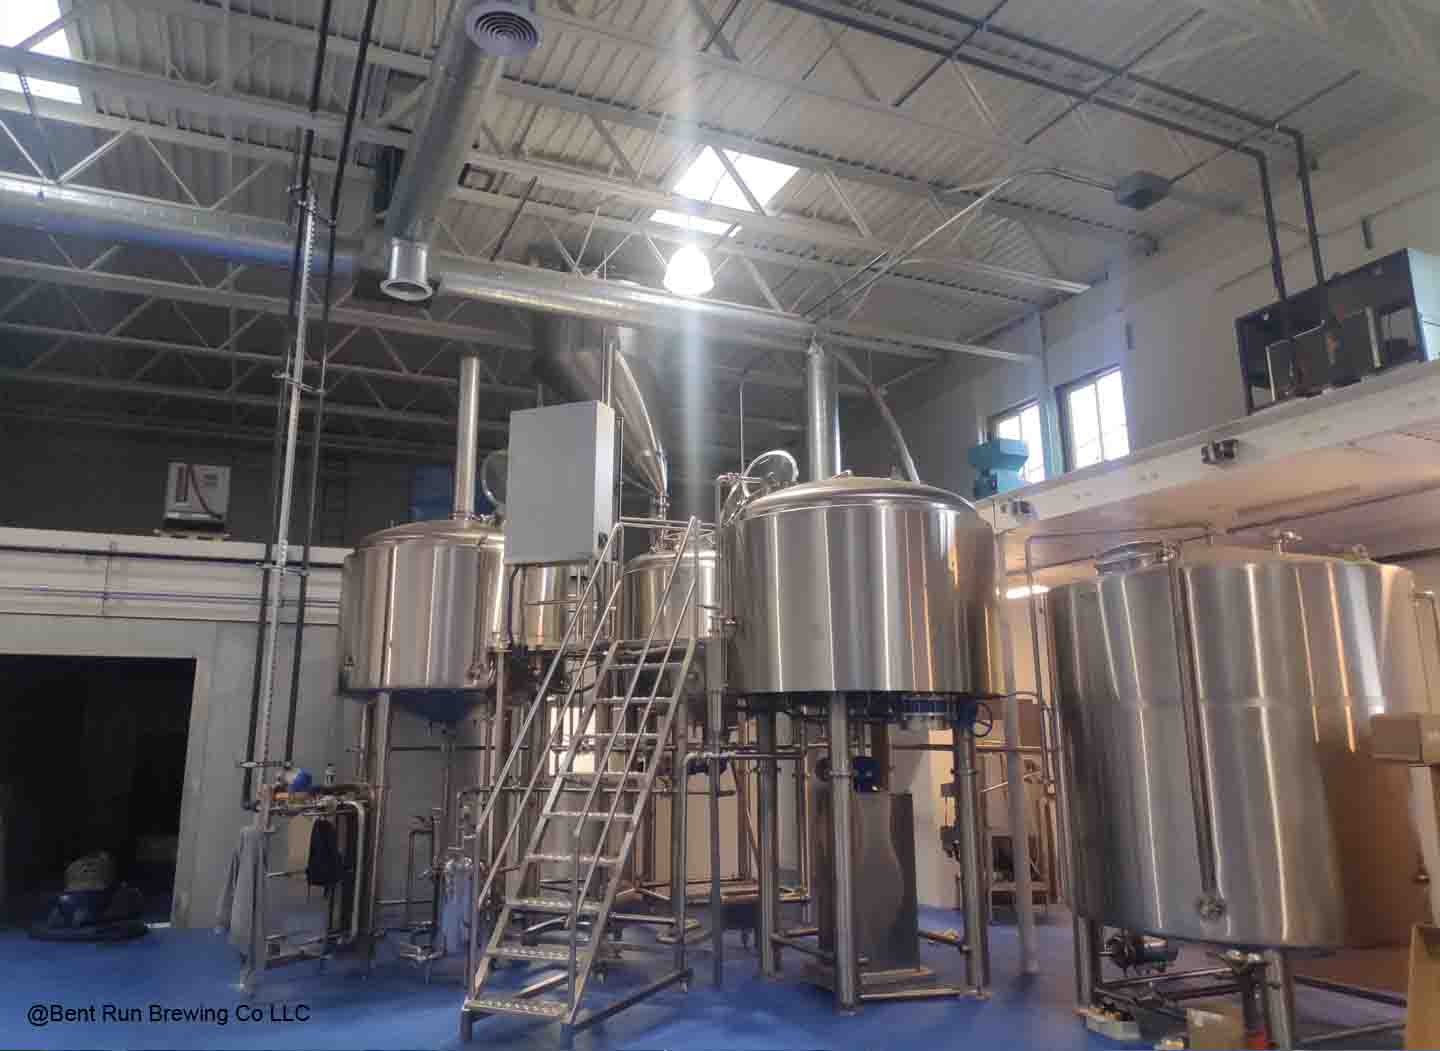 <b>The 5 Critical Things You Need To Consider When Building A Brewery</b>